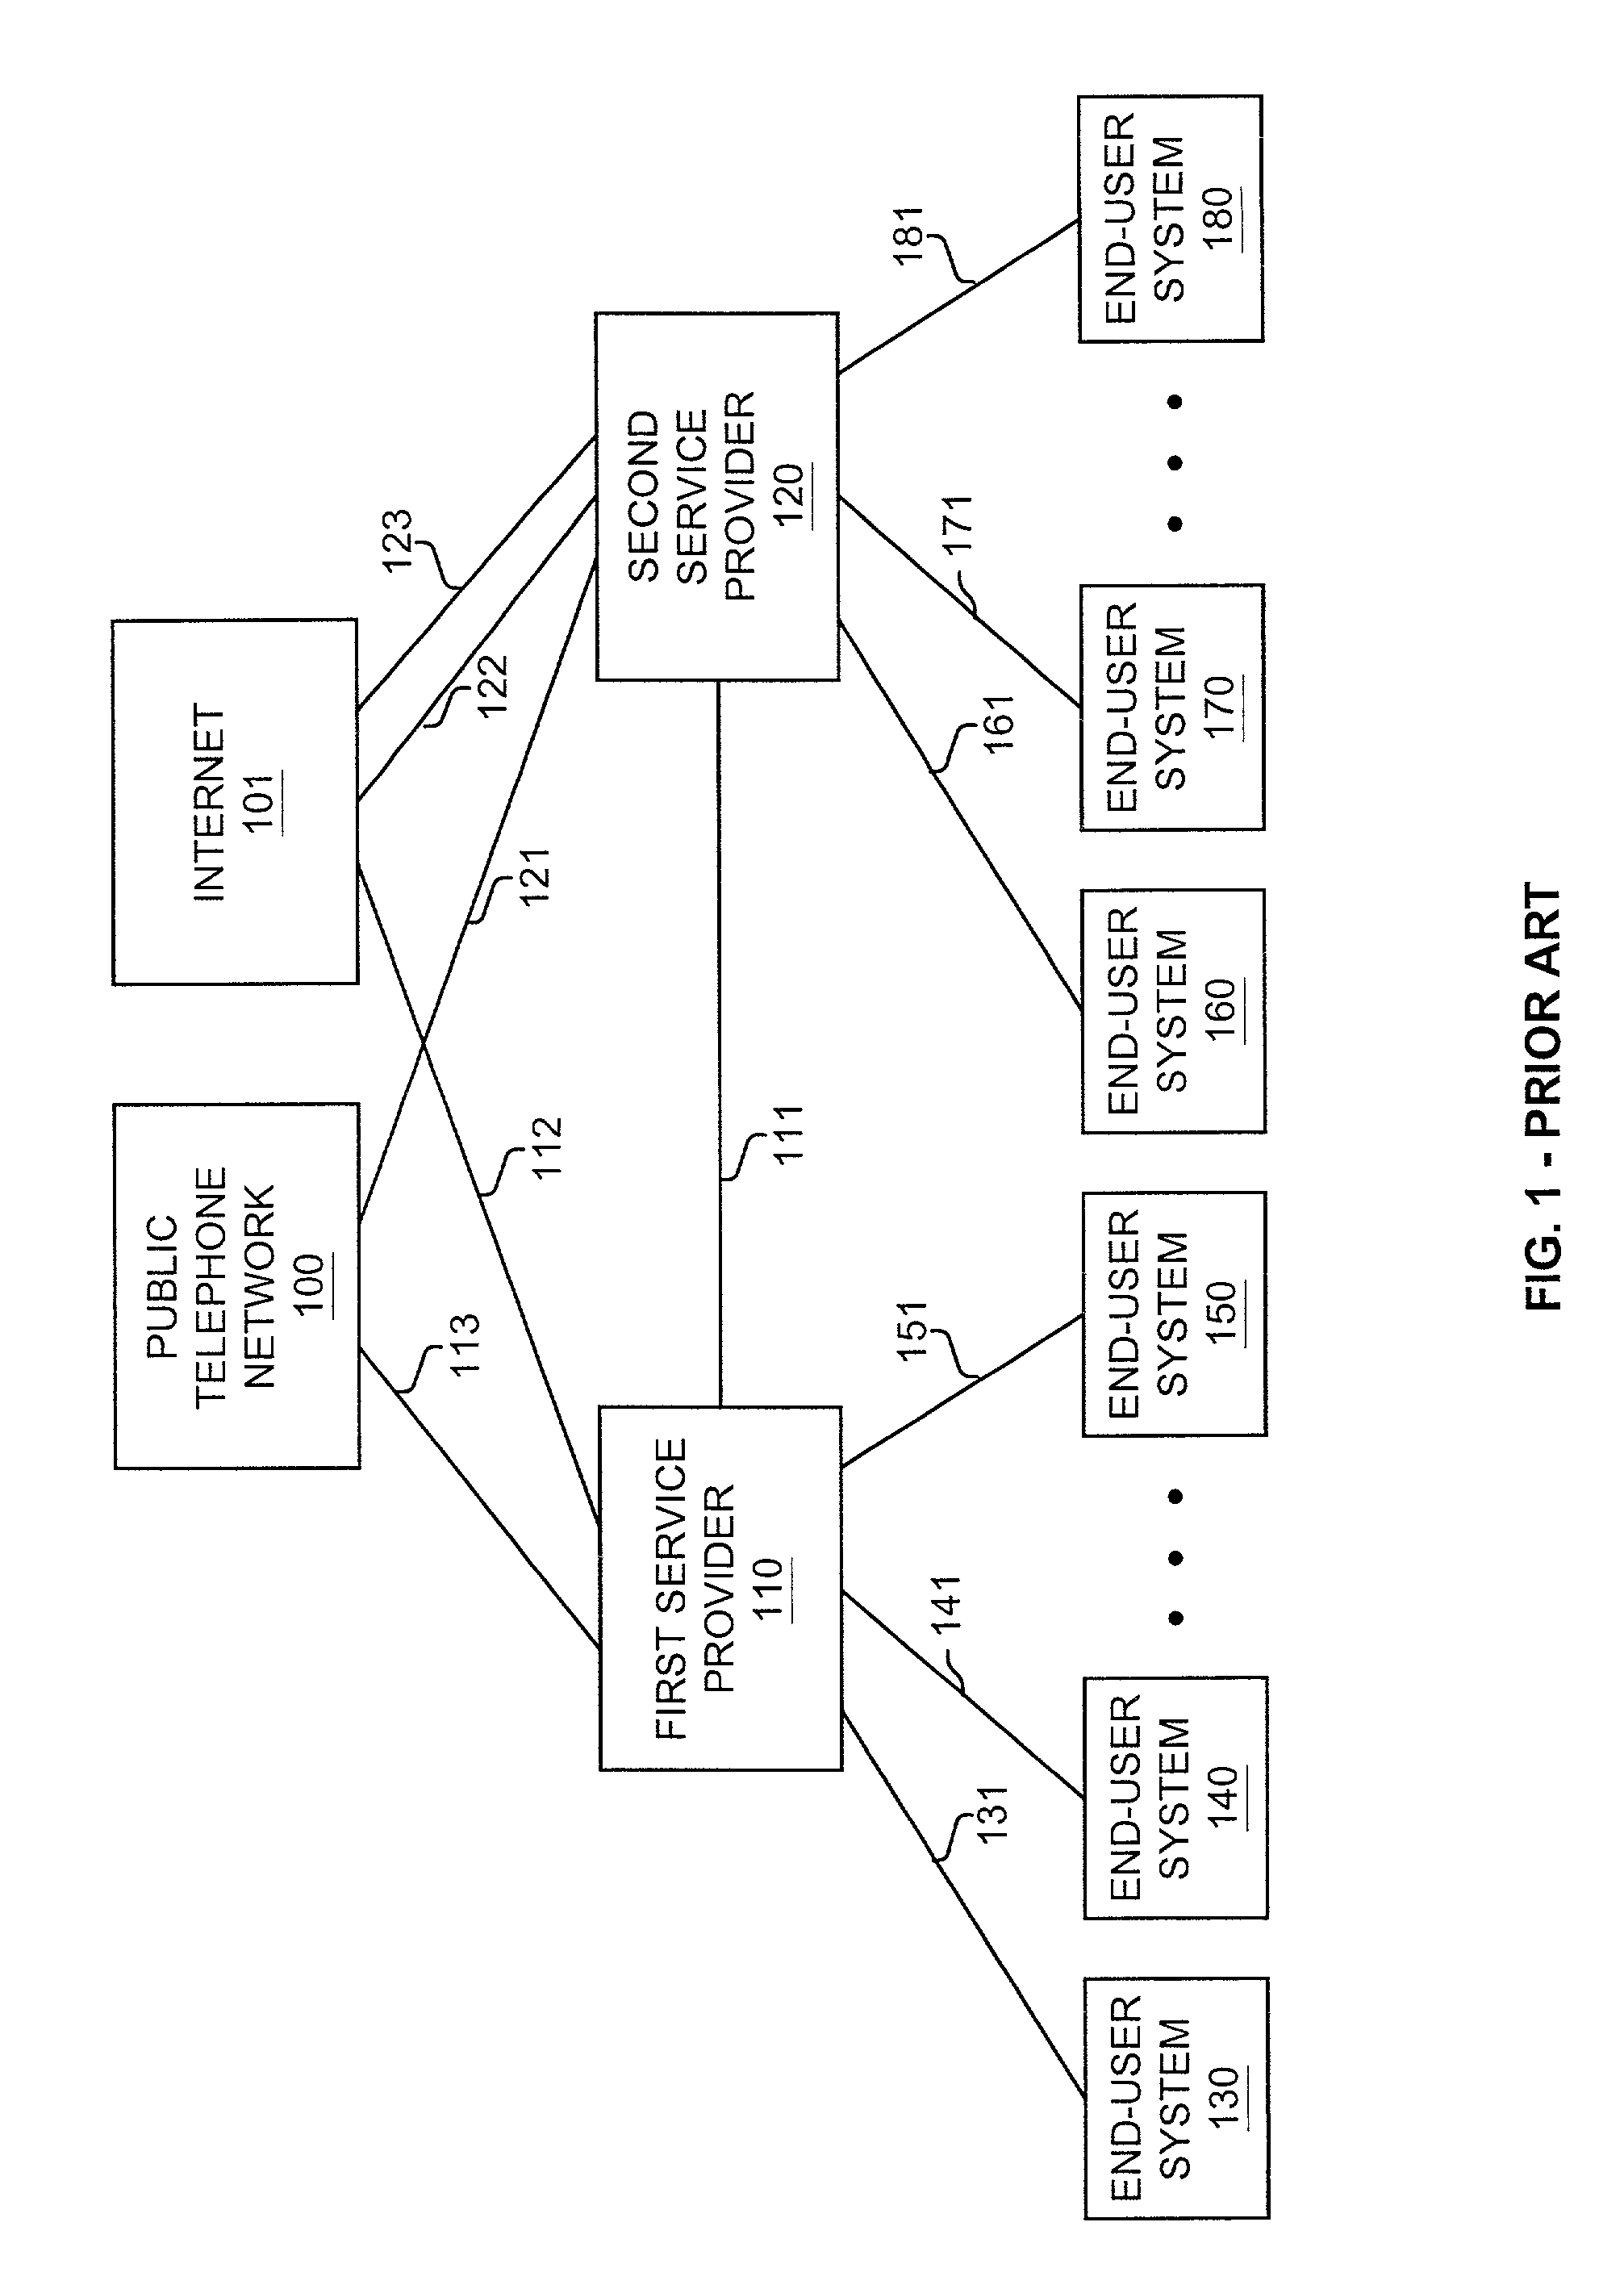 Establishing end-user communication services that use peer-to-peer internet protocol connections between service providers